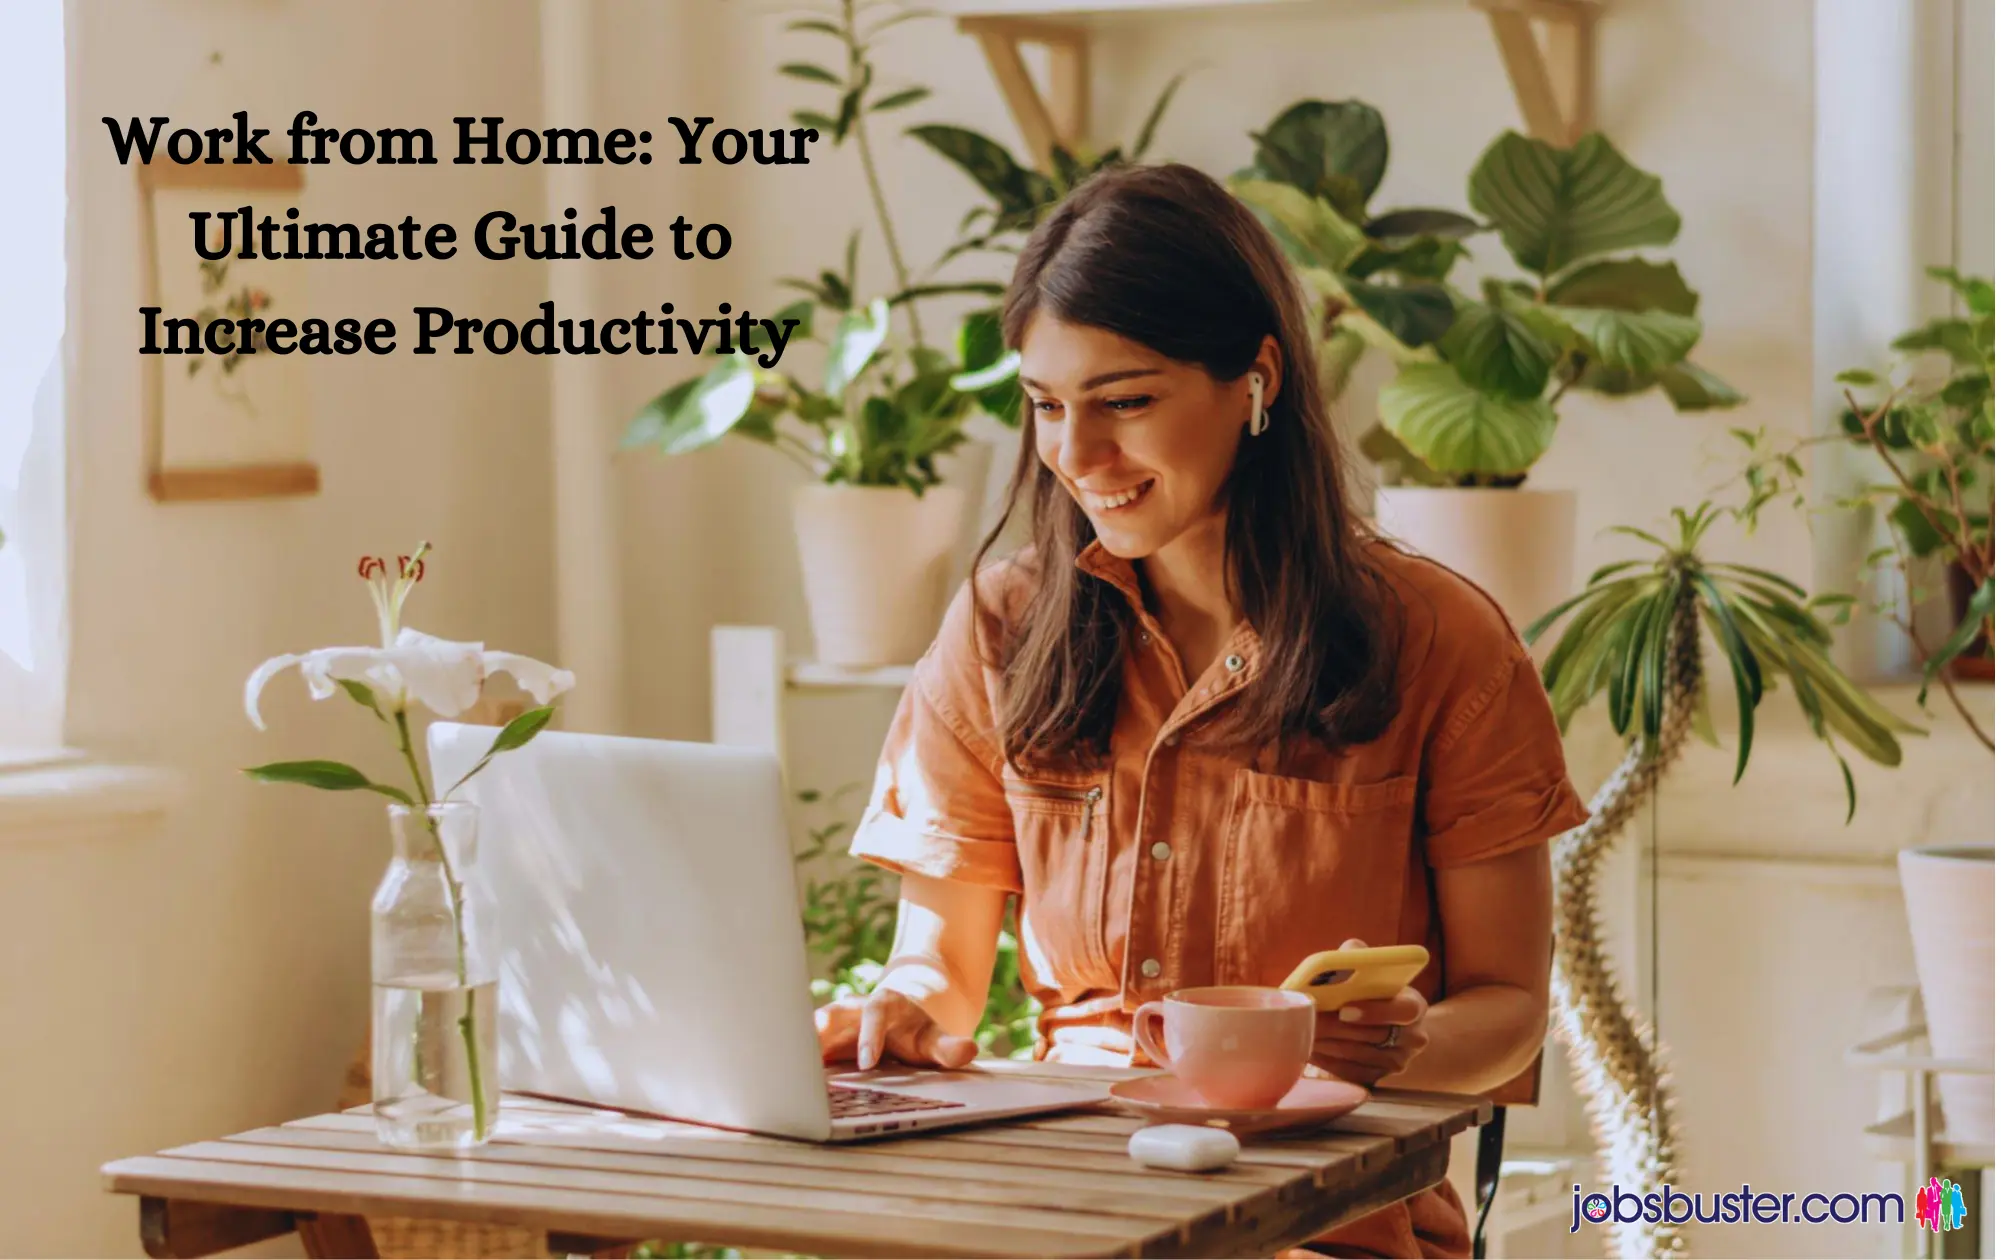 Work from Home: Your Ultimate Guide to Increase Productivity